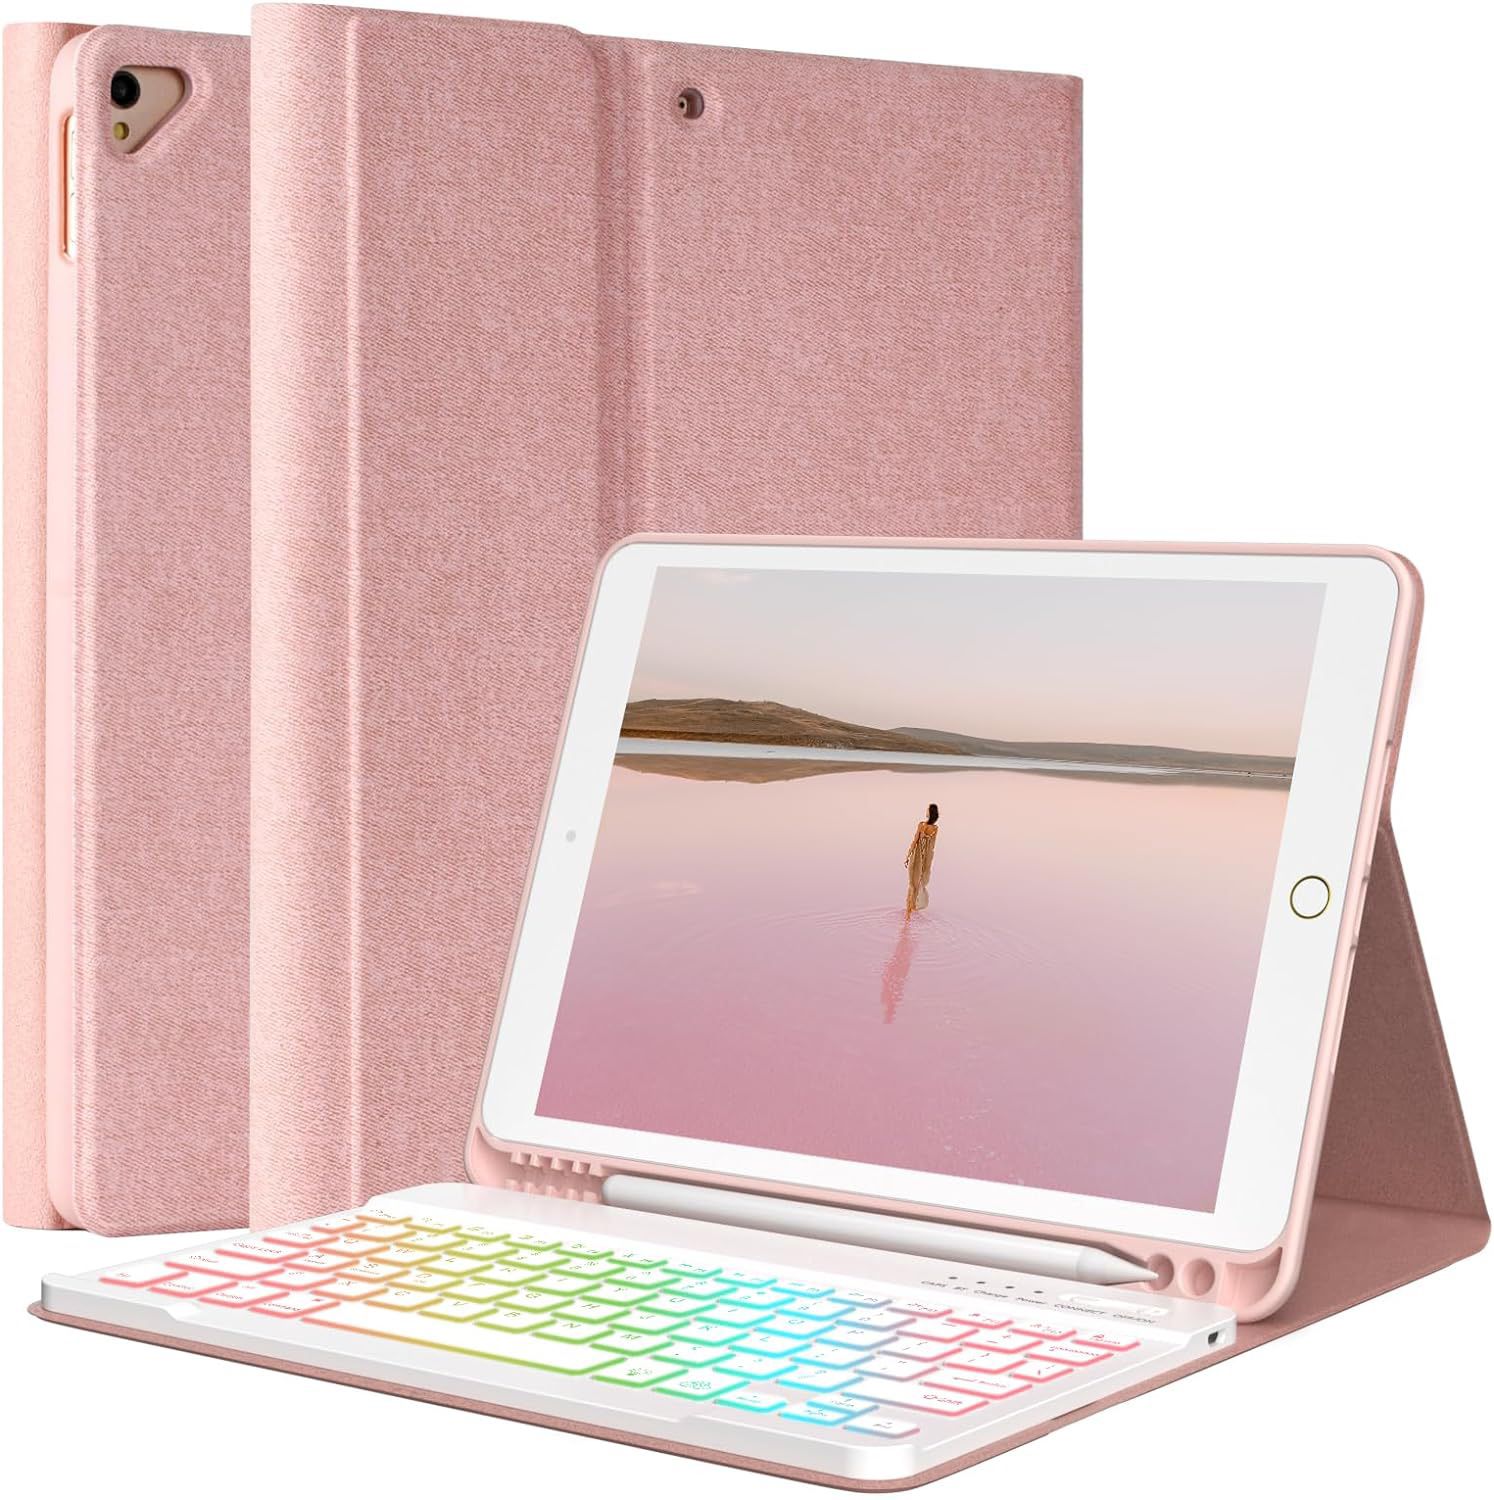 iPad 9th Gen/8th/7th Gen 10.2” Keyboard Case,7-Color Backlit,with Pencil Holder.